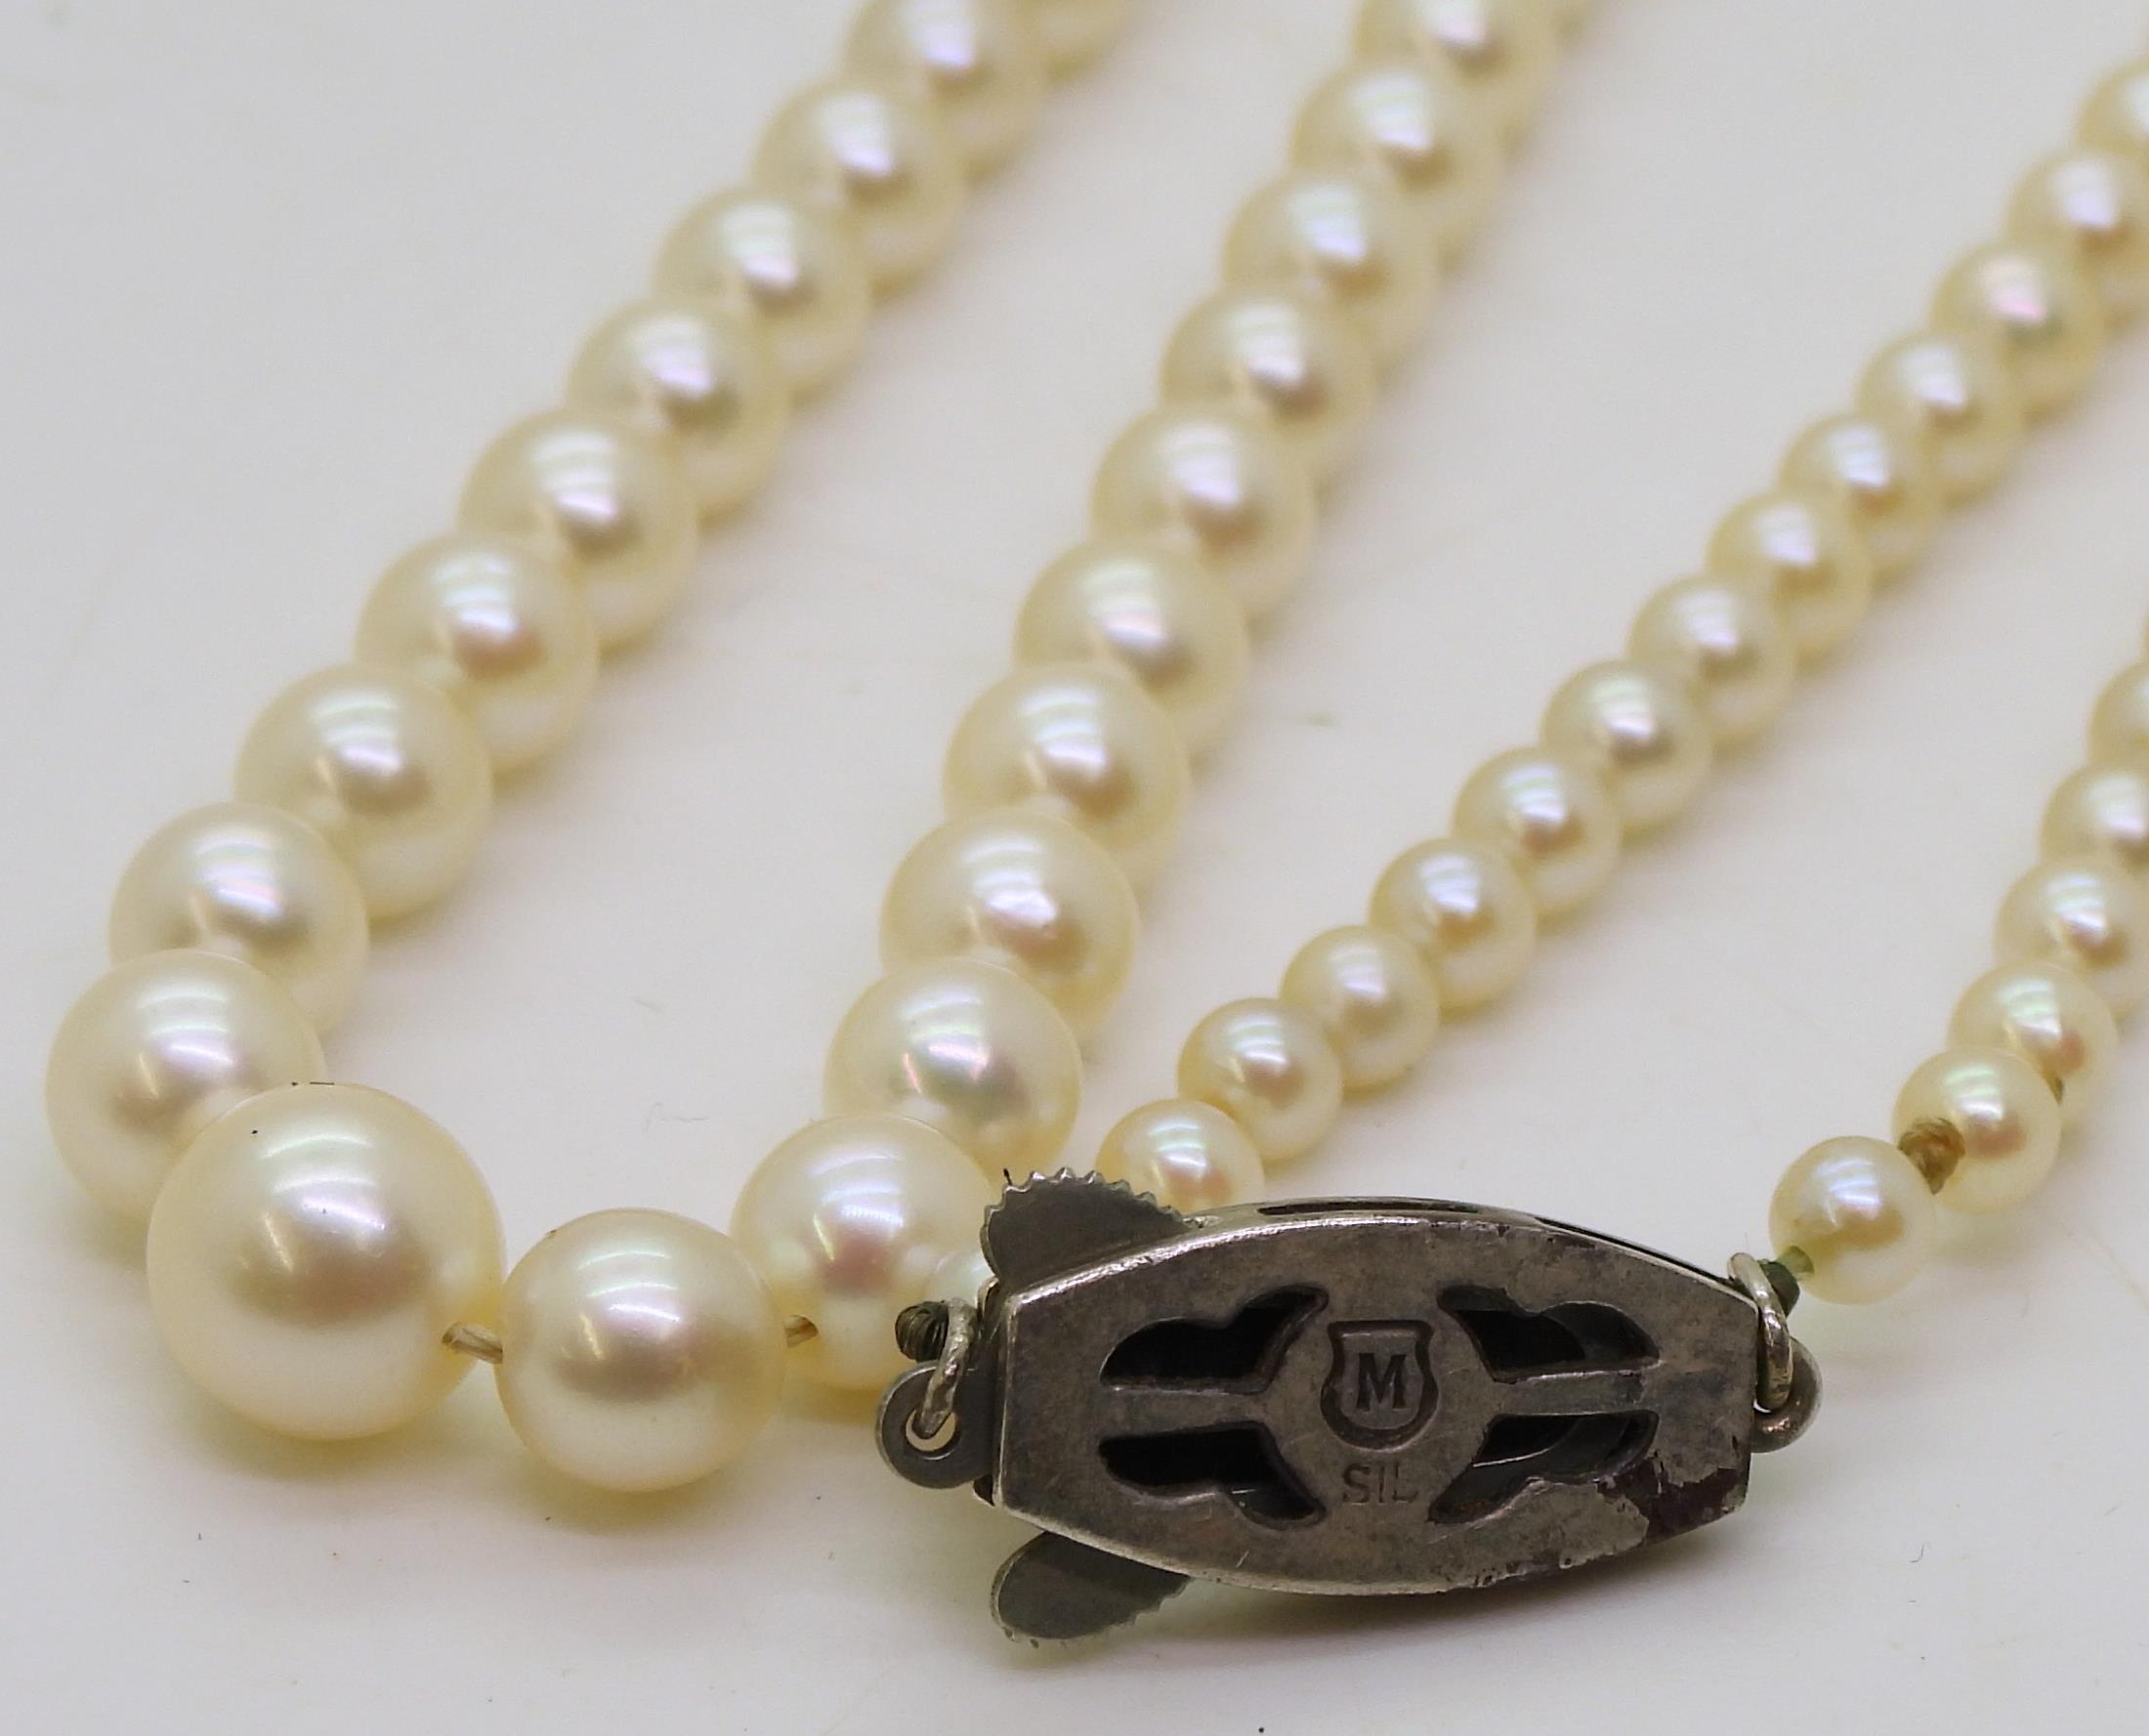 A 46cm string of Mikimoto pearls with silver pearl set Mikimoto branded clasp, in original box - Image 3 of 6